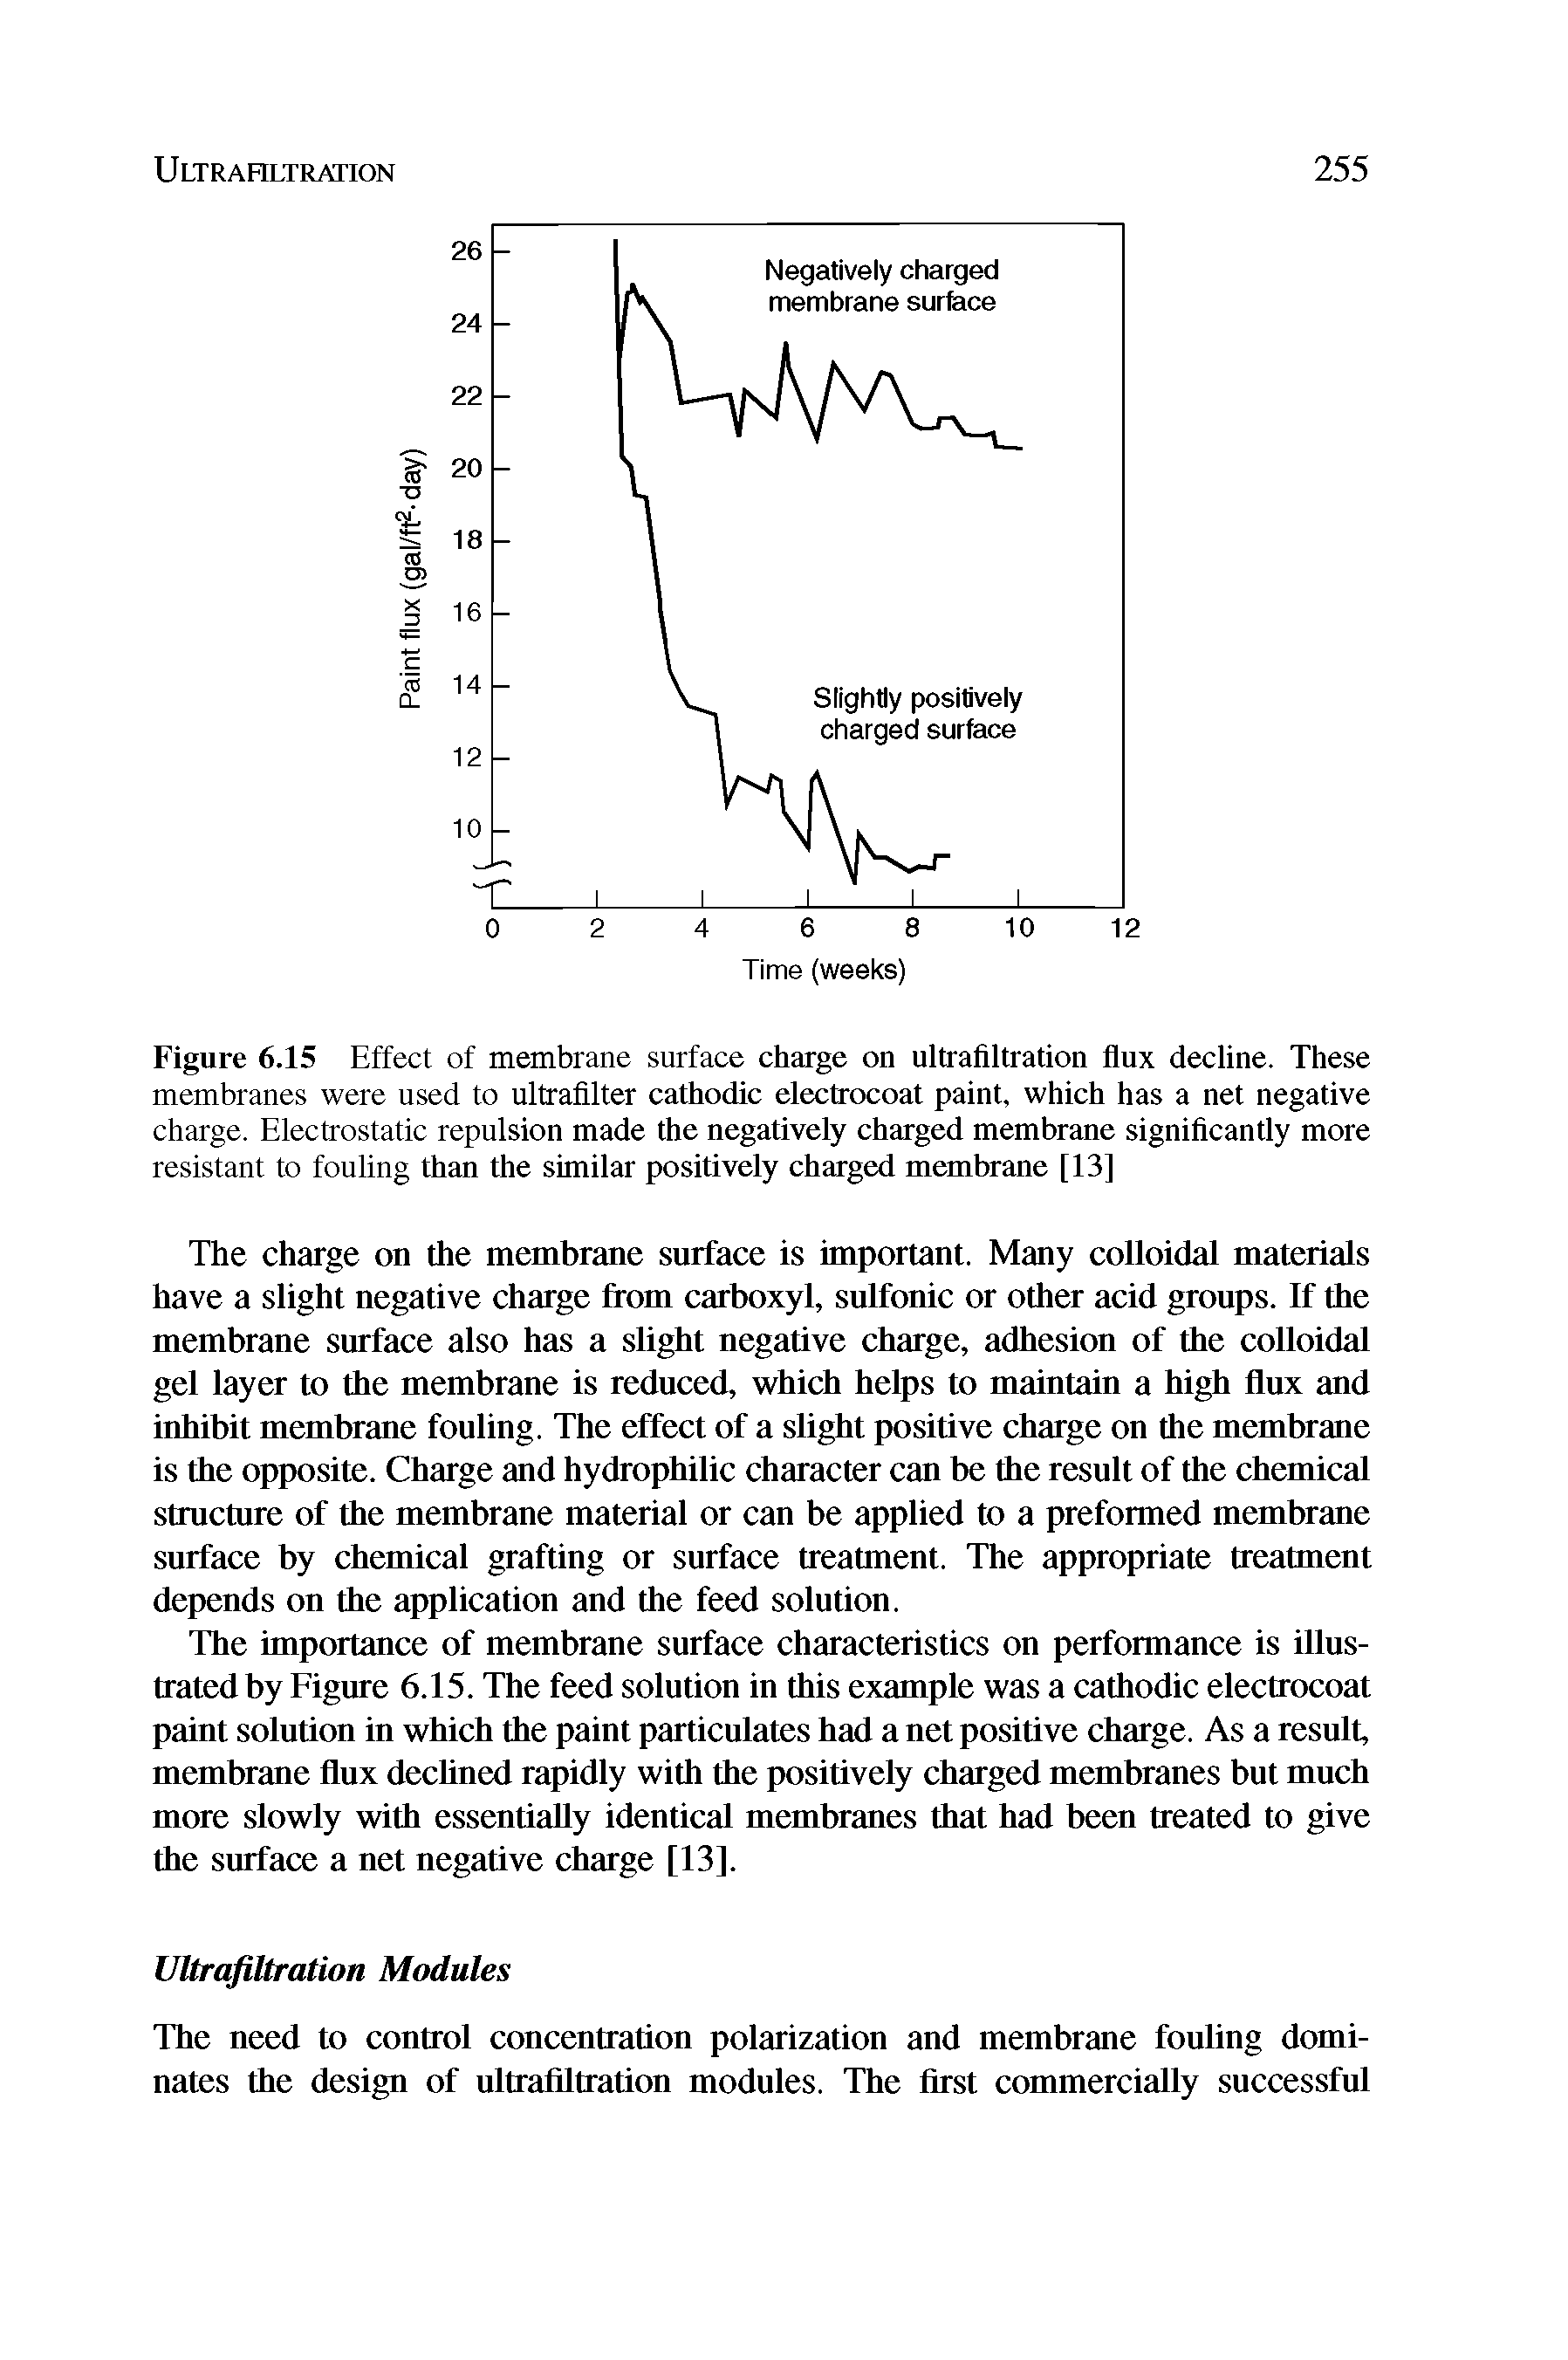 Figure 6.15 Effect of membrane surface charge on ultrafiltration flux decline. These membranes were used to ultrafilter cathodic electrocoat paint, which has a net negative charge. Electrostatic repulsion made the negatively charged membrane significantly more resistant to fouling than the similar positively charged membrane [13]...